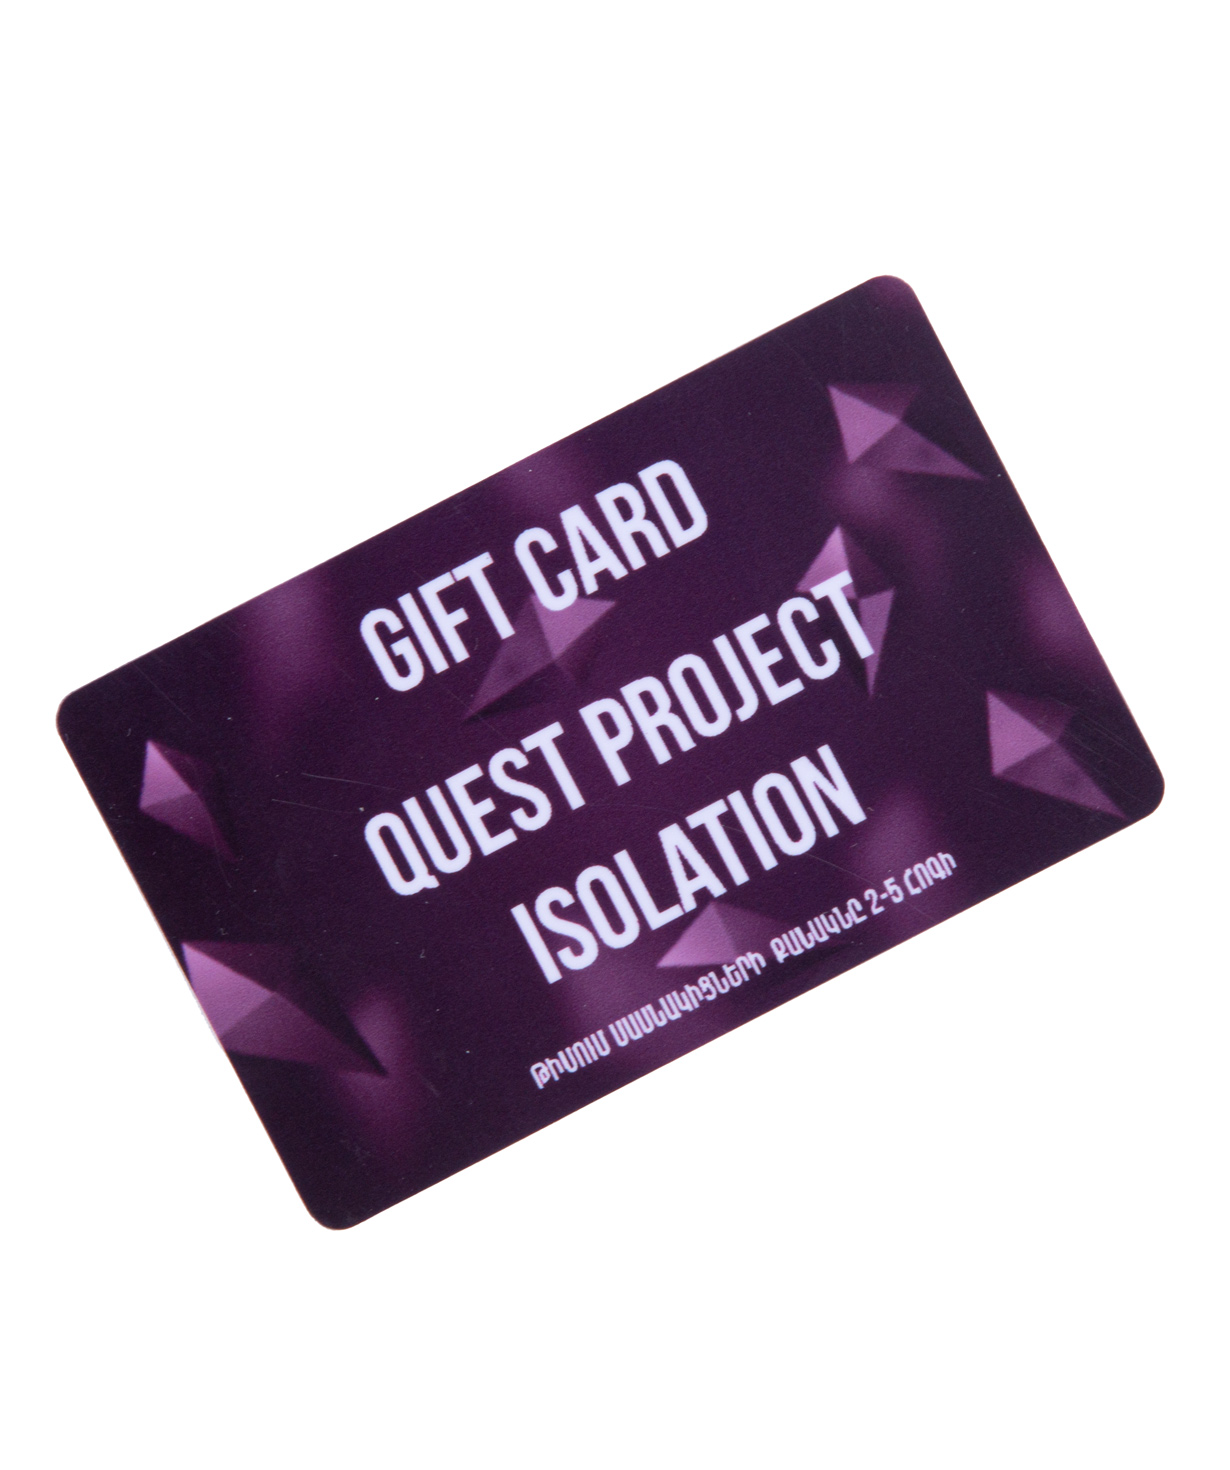 Gift card ''Quest Project Isolation'' Prison cell